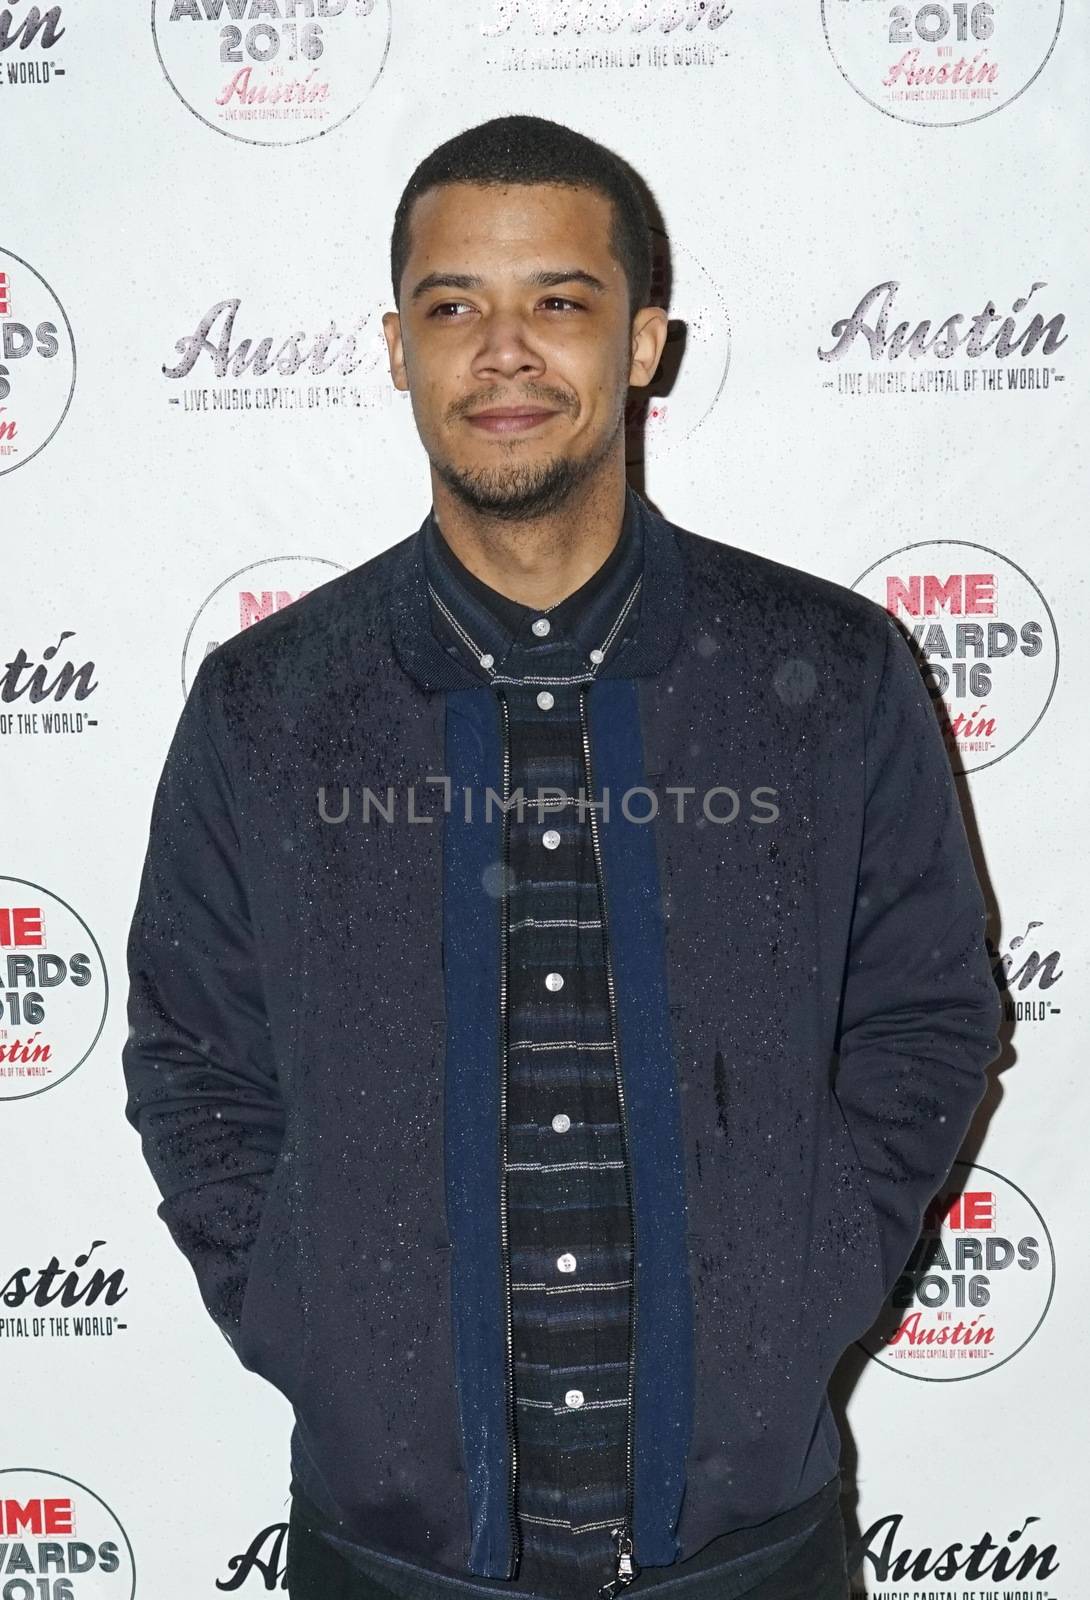 UNITED KINGDOM, London: British singer Raleigh Ritchie attends the NME awards at O2 Academy Brixton on February 17, 2016 in London, England. 